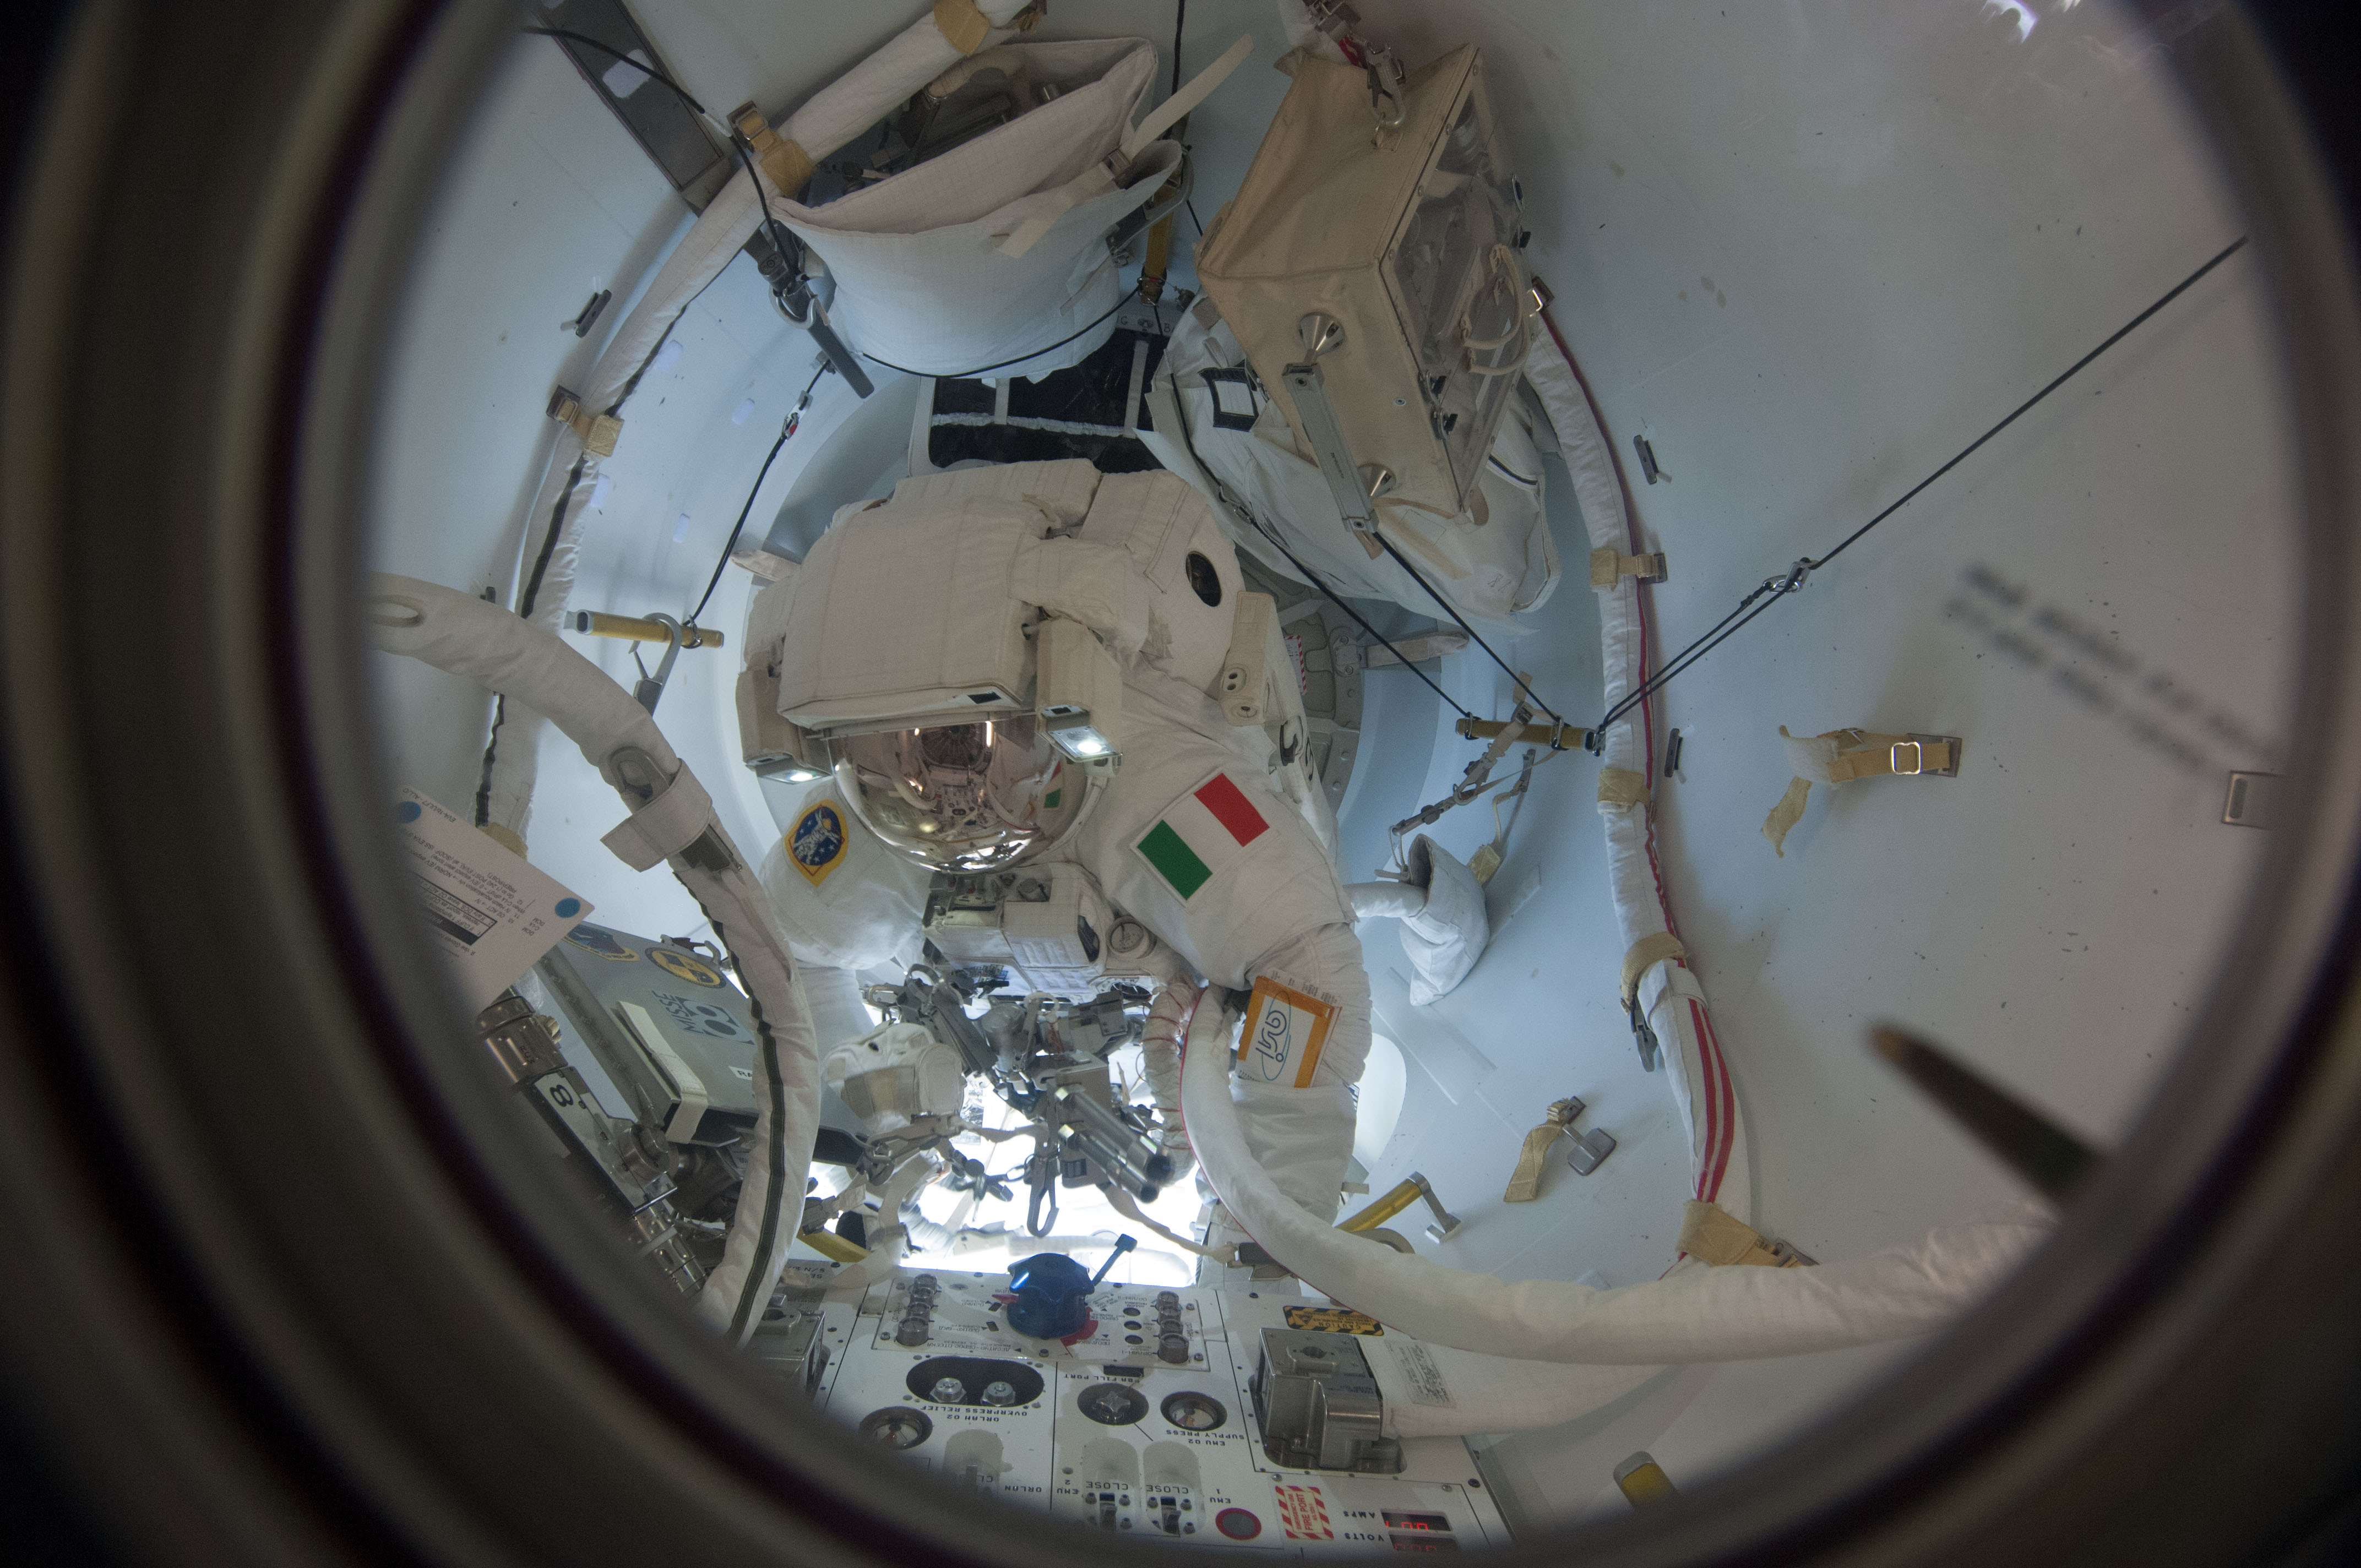 On Tuesday, Luca Parmitano—who last week became Italy's first spacewalker—will be venture again out of the Quest airlock with Chris Cassidy. Photo Credit: NASA